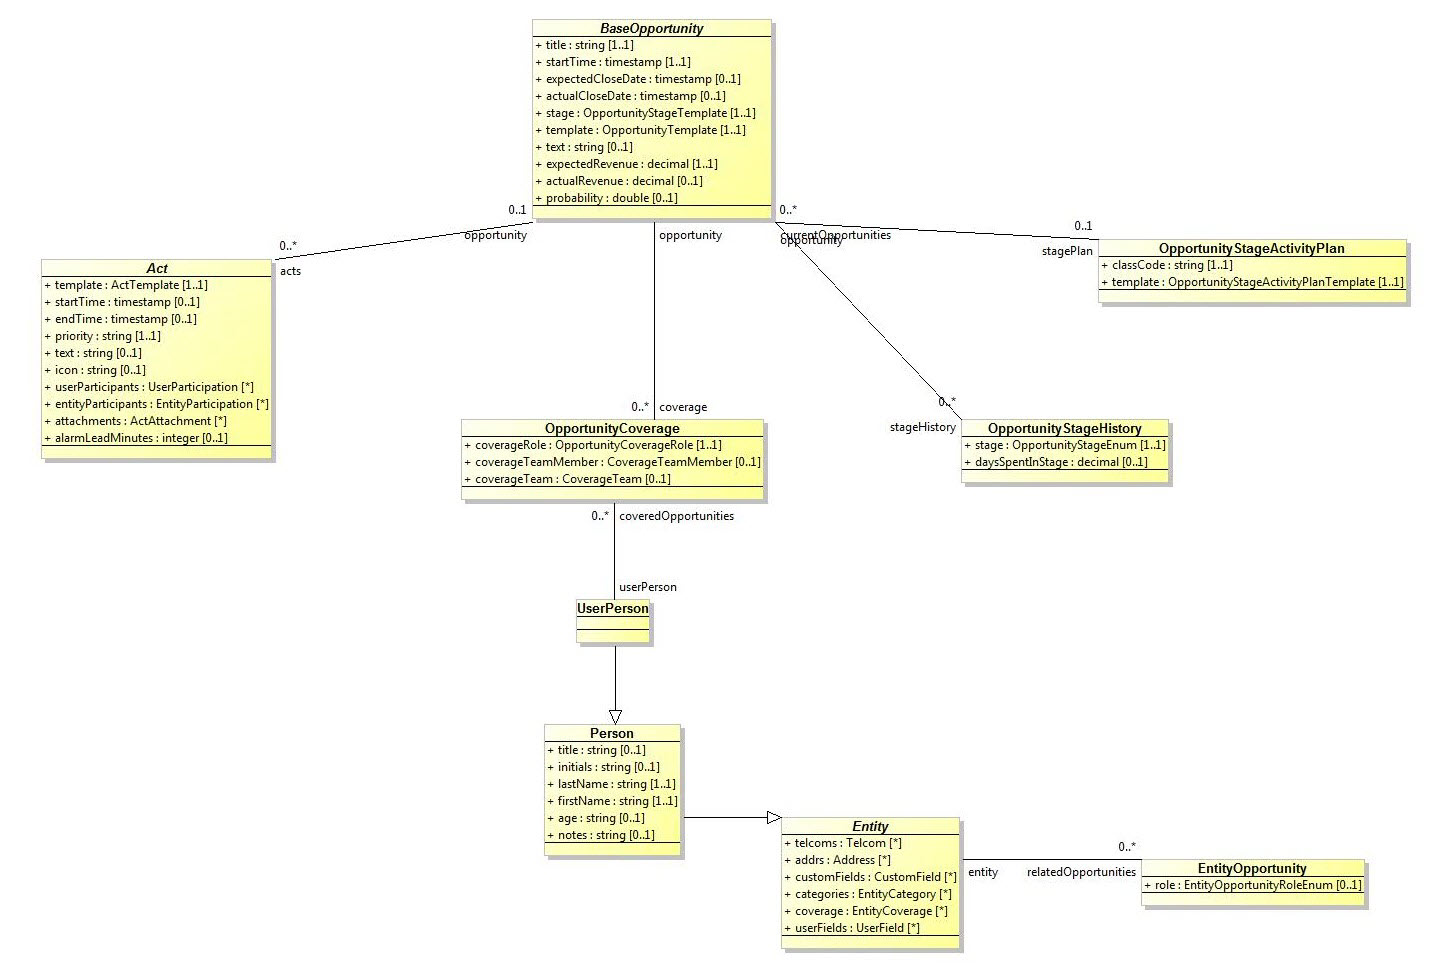 baseOpportunity class diagram